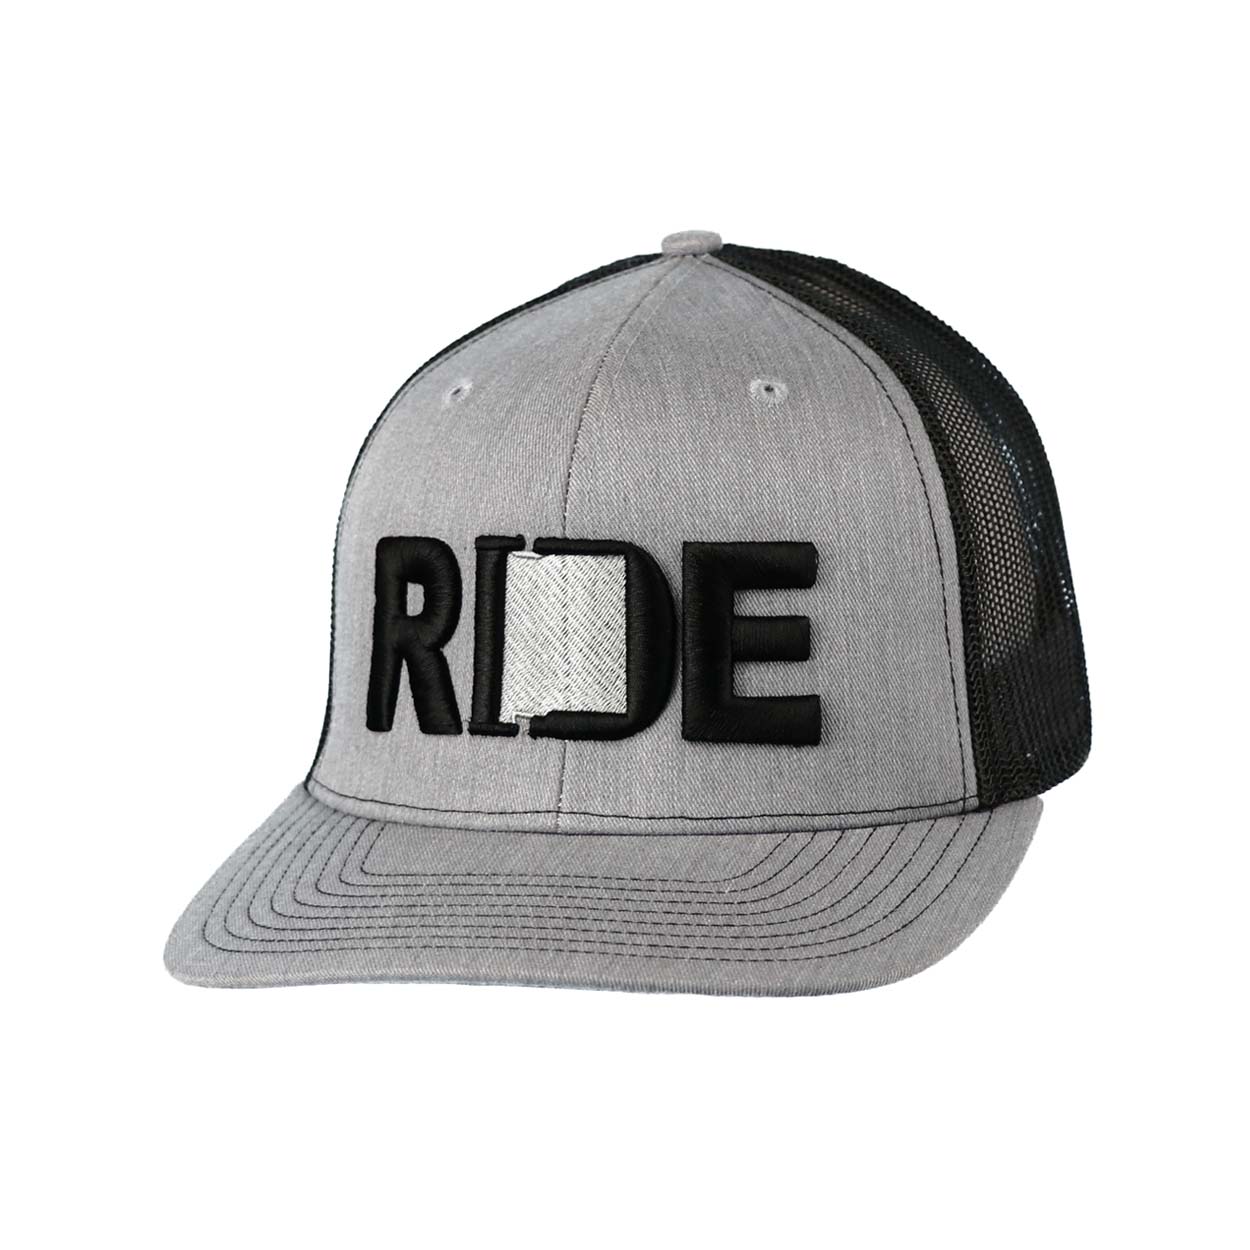 Ride New Mexico Classic Pro 3D Puff Embroidered Snapback Trucker Hat Heather Gray/Black